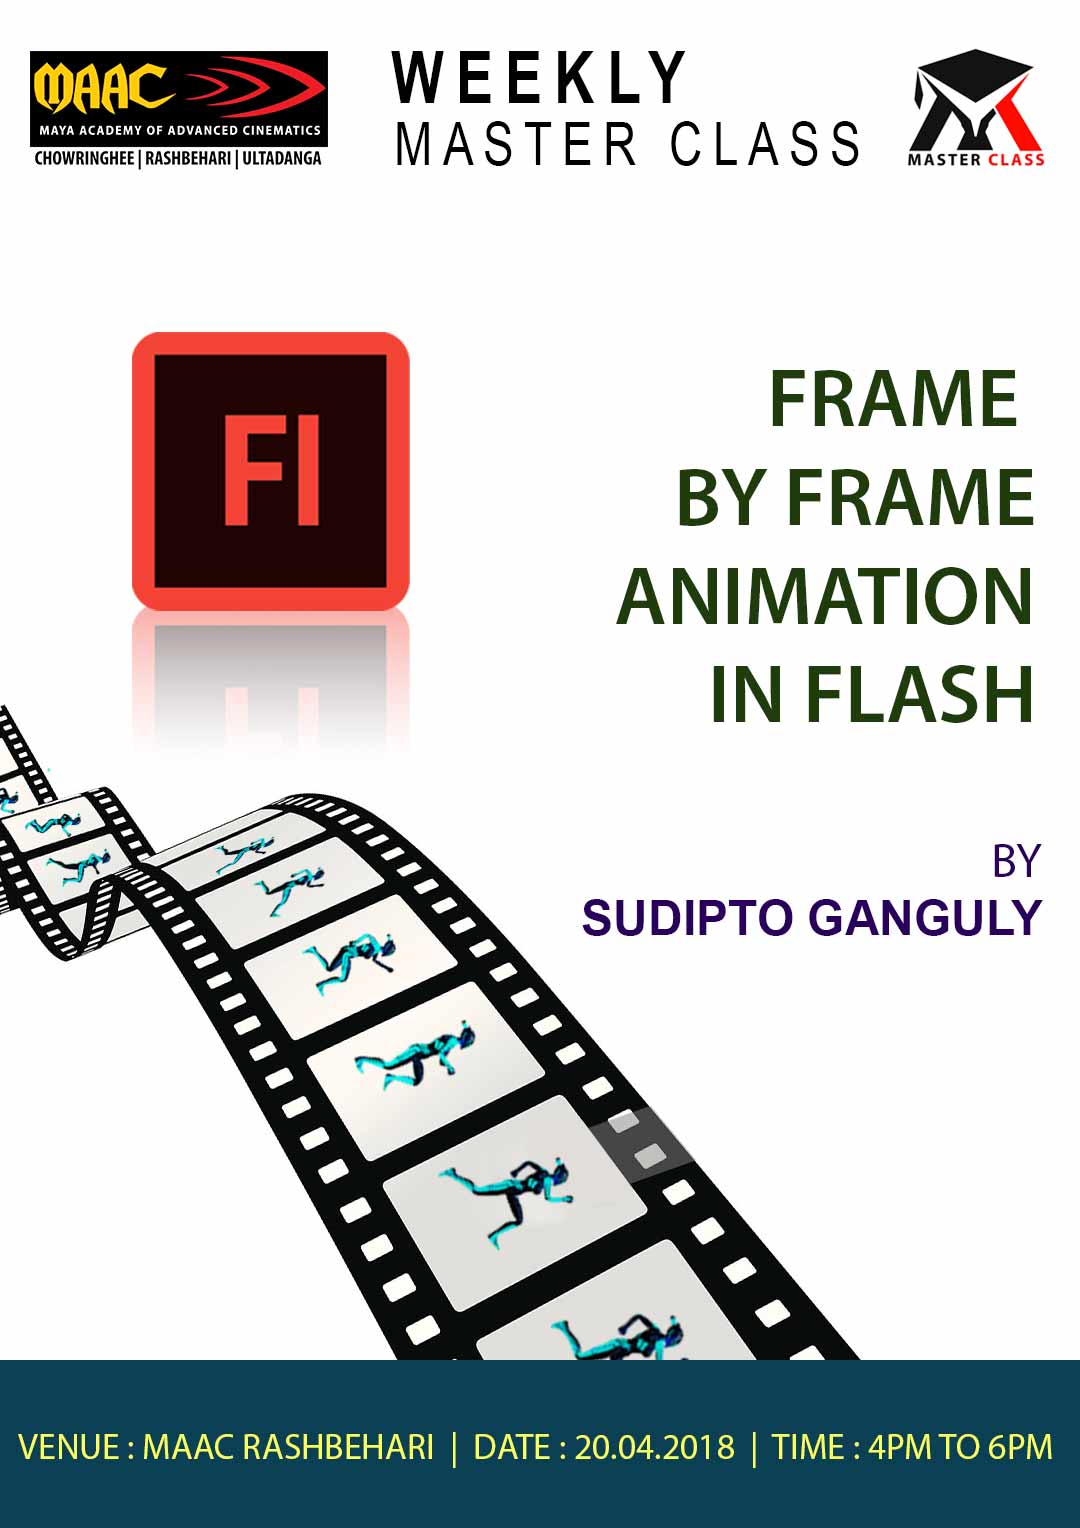 Weekly Master Class on FRAME BY FRAME Animation in Flash